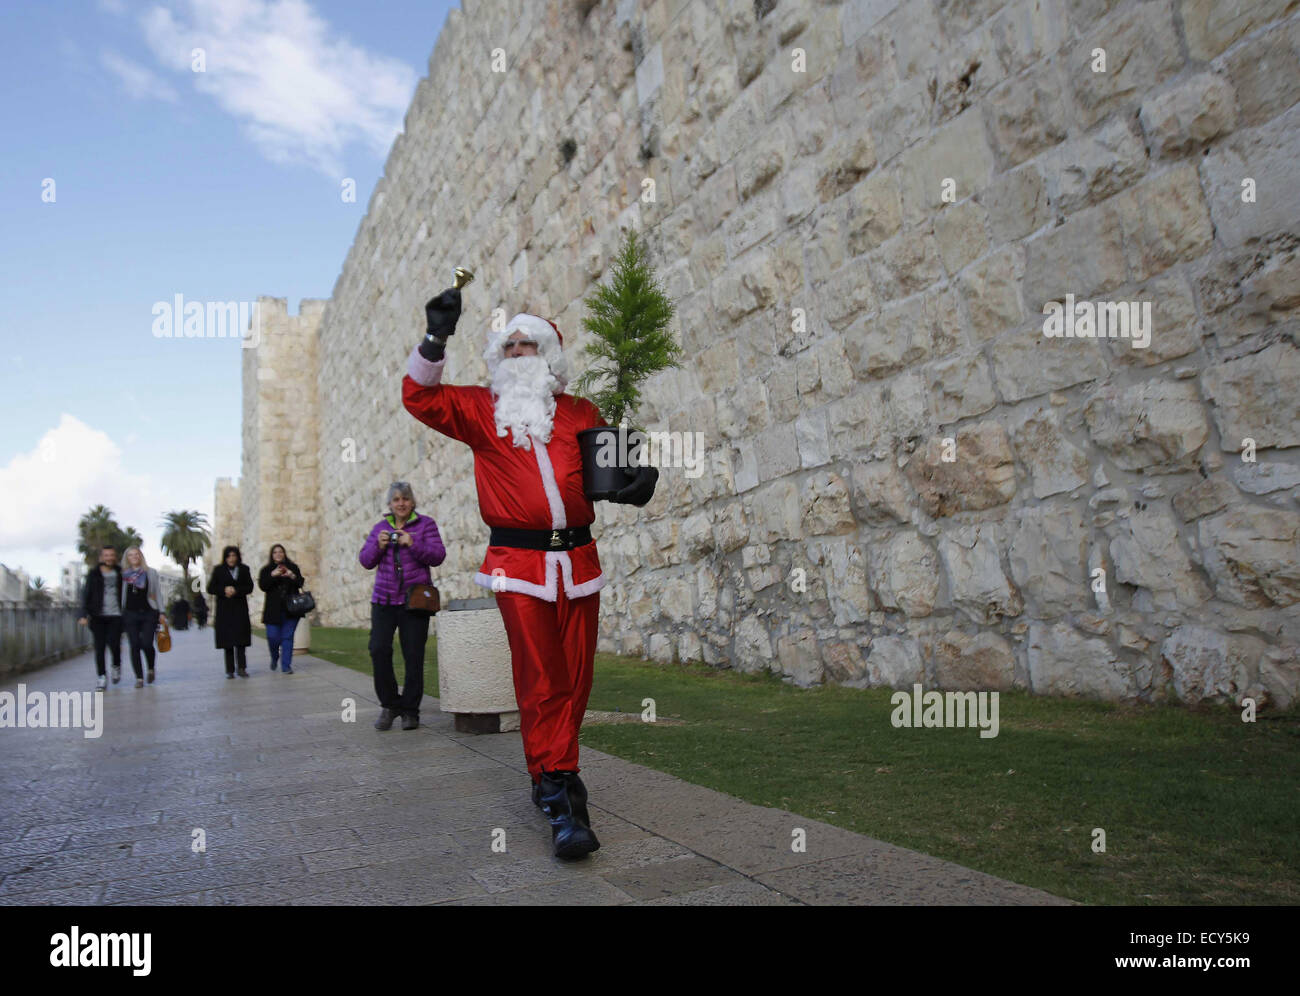 Jerusalem. 22nd Dec, 2014. Issa Kassissieh, an Israeli-Arab Christian, wears a Santa Claus costume as he poses for the media in Jerusalem's Old City, during the annual distribution of Christmas trees by the Jerusalem municipality December 22, 2014 Credit:  Muammar Awad/APA Images/ZUMA Wire/Alamy Live News Stock Photo